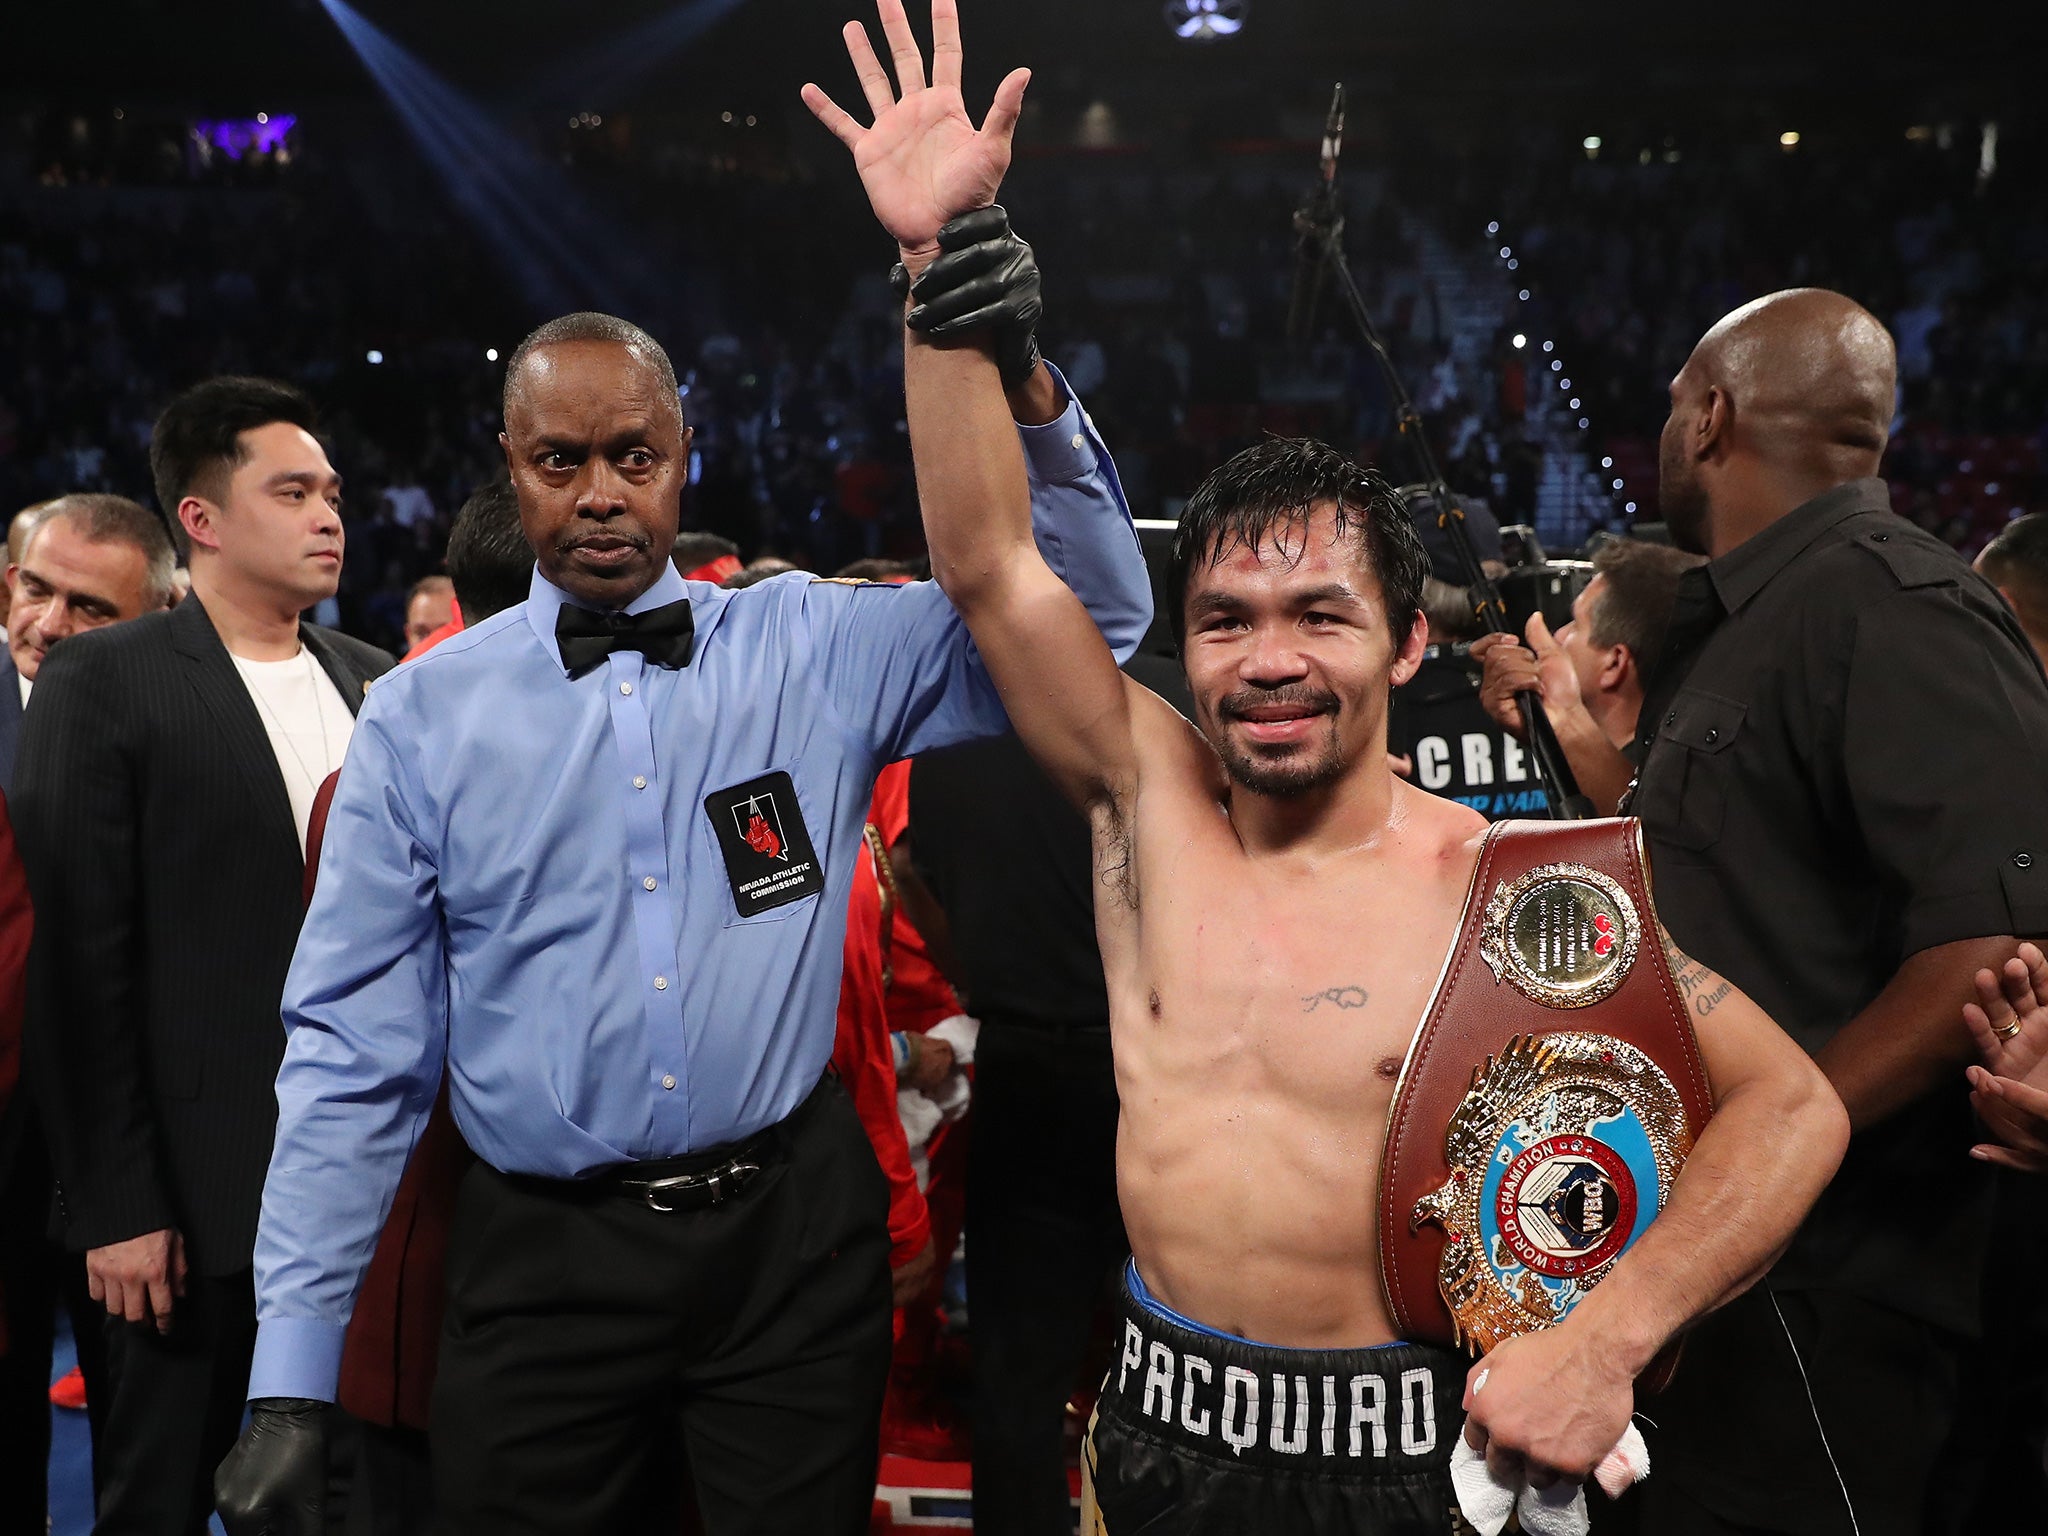 Pacquiao celebrates with his WBO welterweight belt after a successful return to the ring